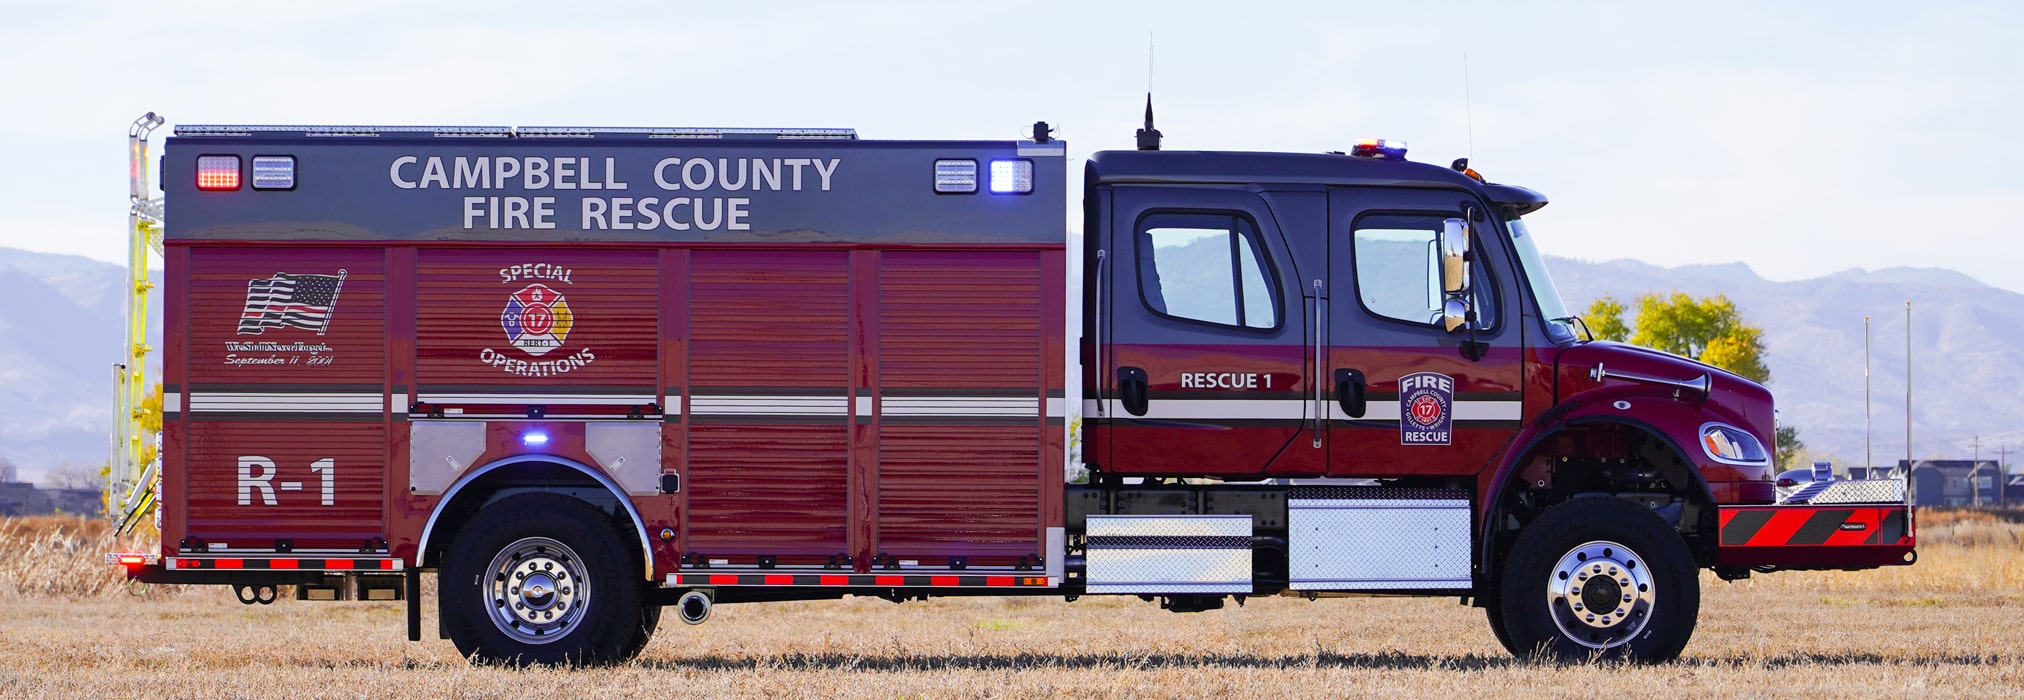 Campbell County Fire Department, Gillette, WY Medium Rescue #1203